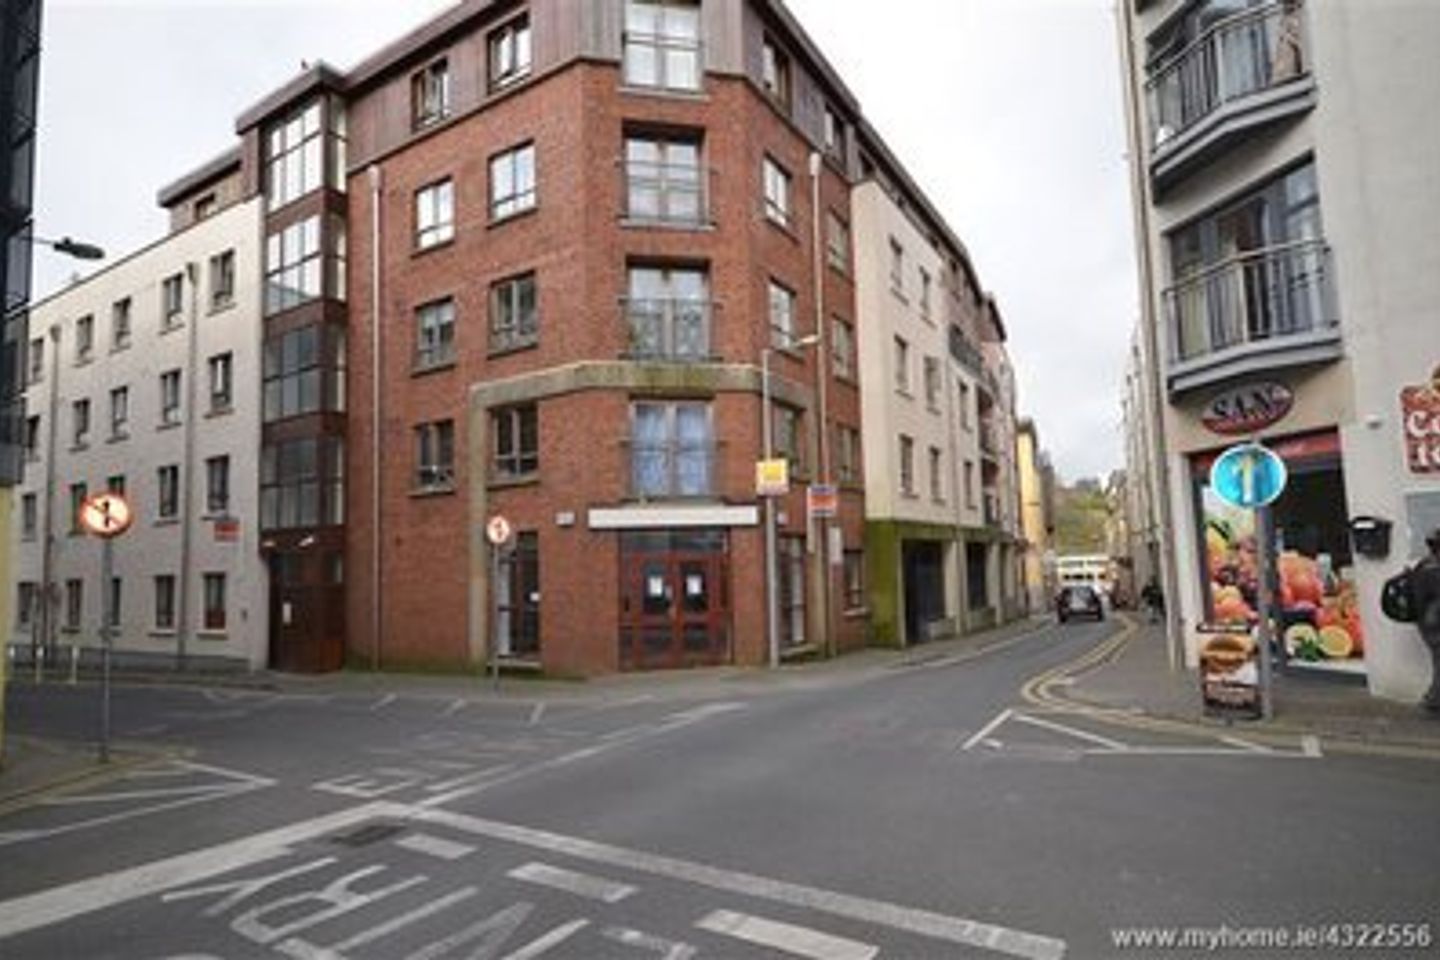 Apartment 28, Penrose Court, Waterford City, Co. Waterford, X91HY42